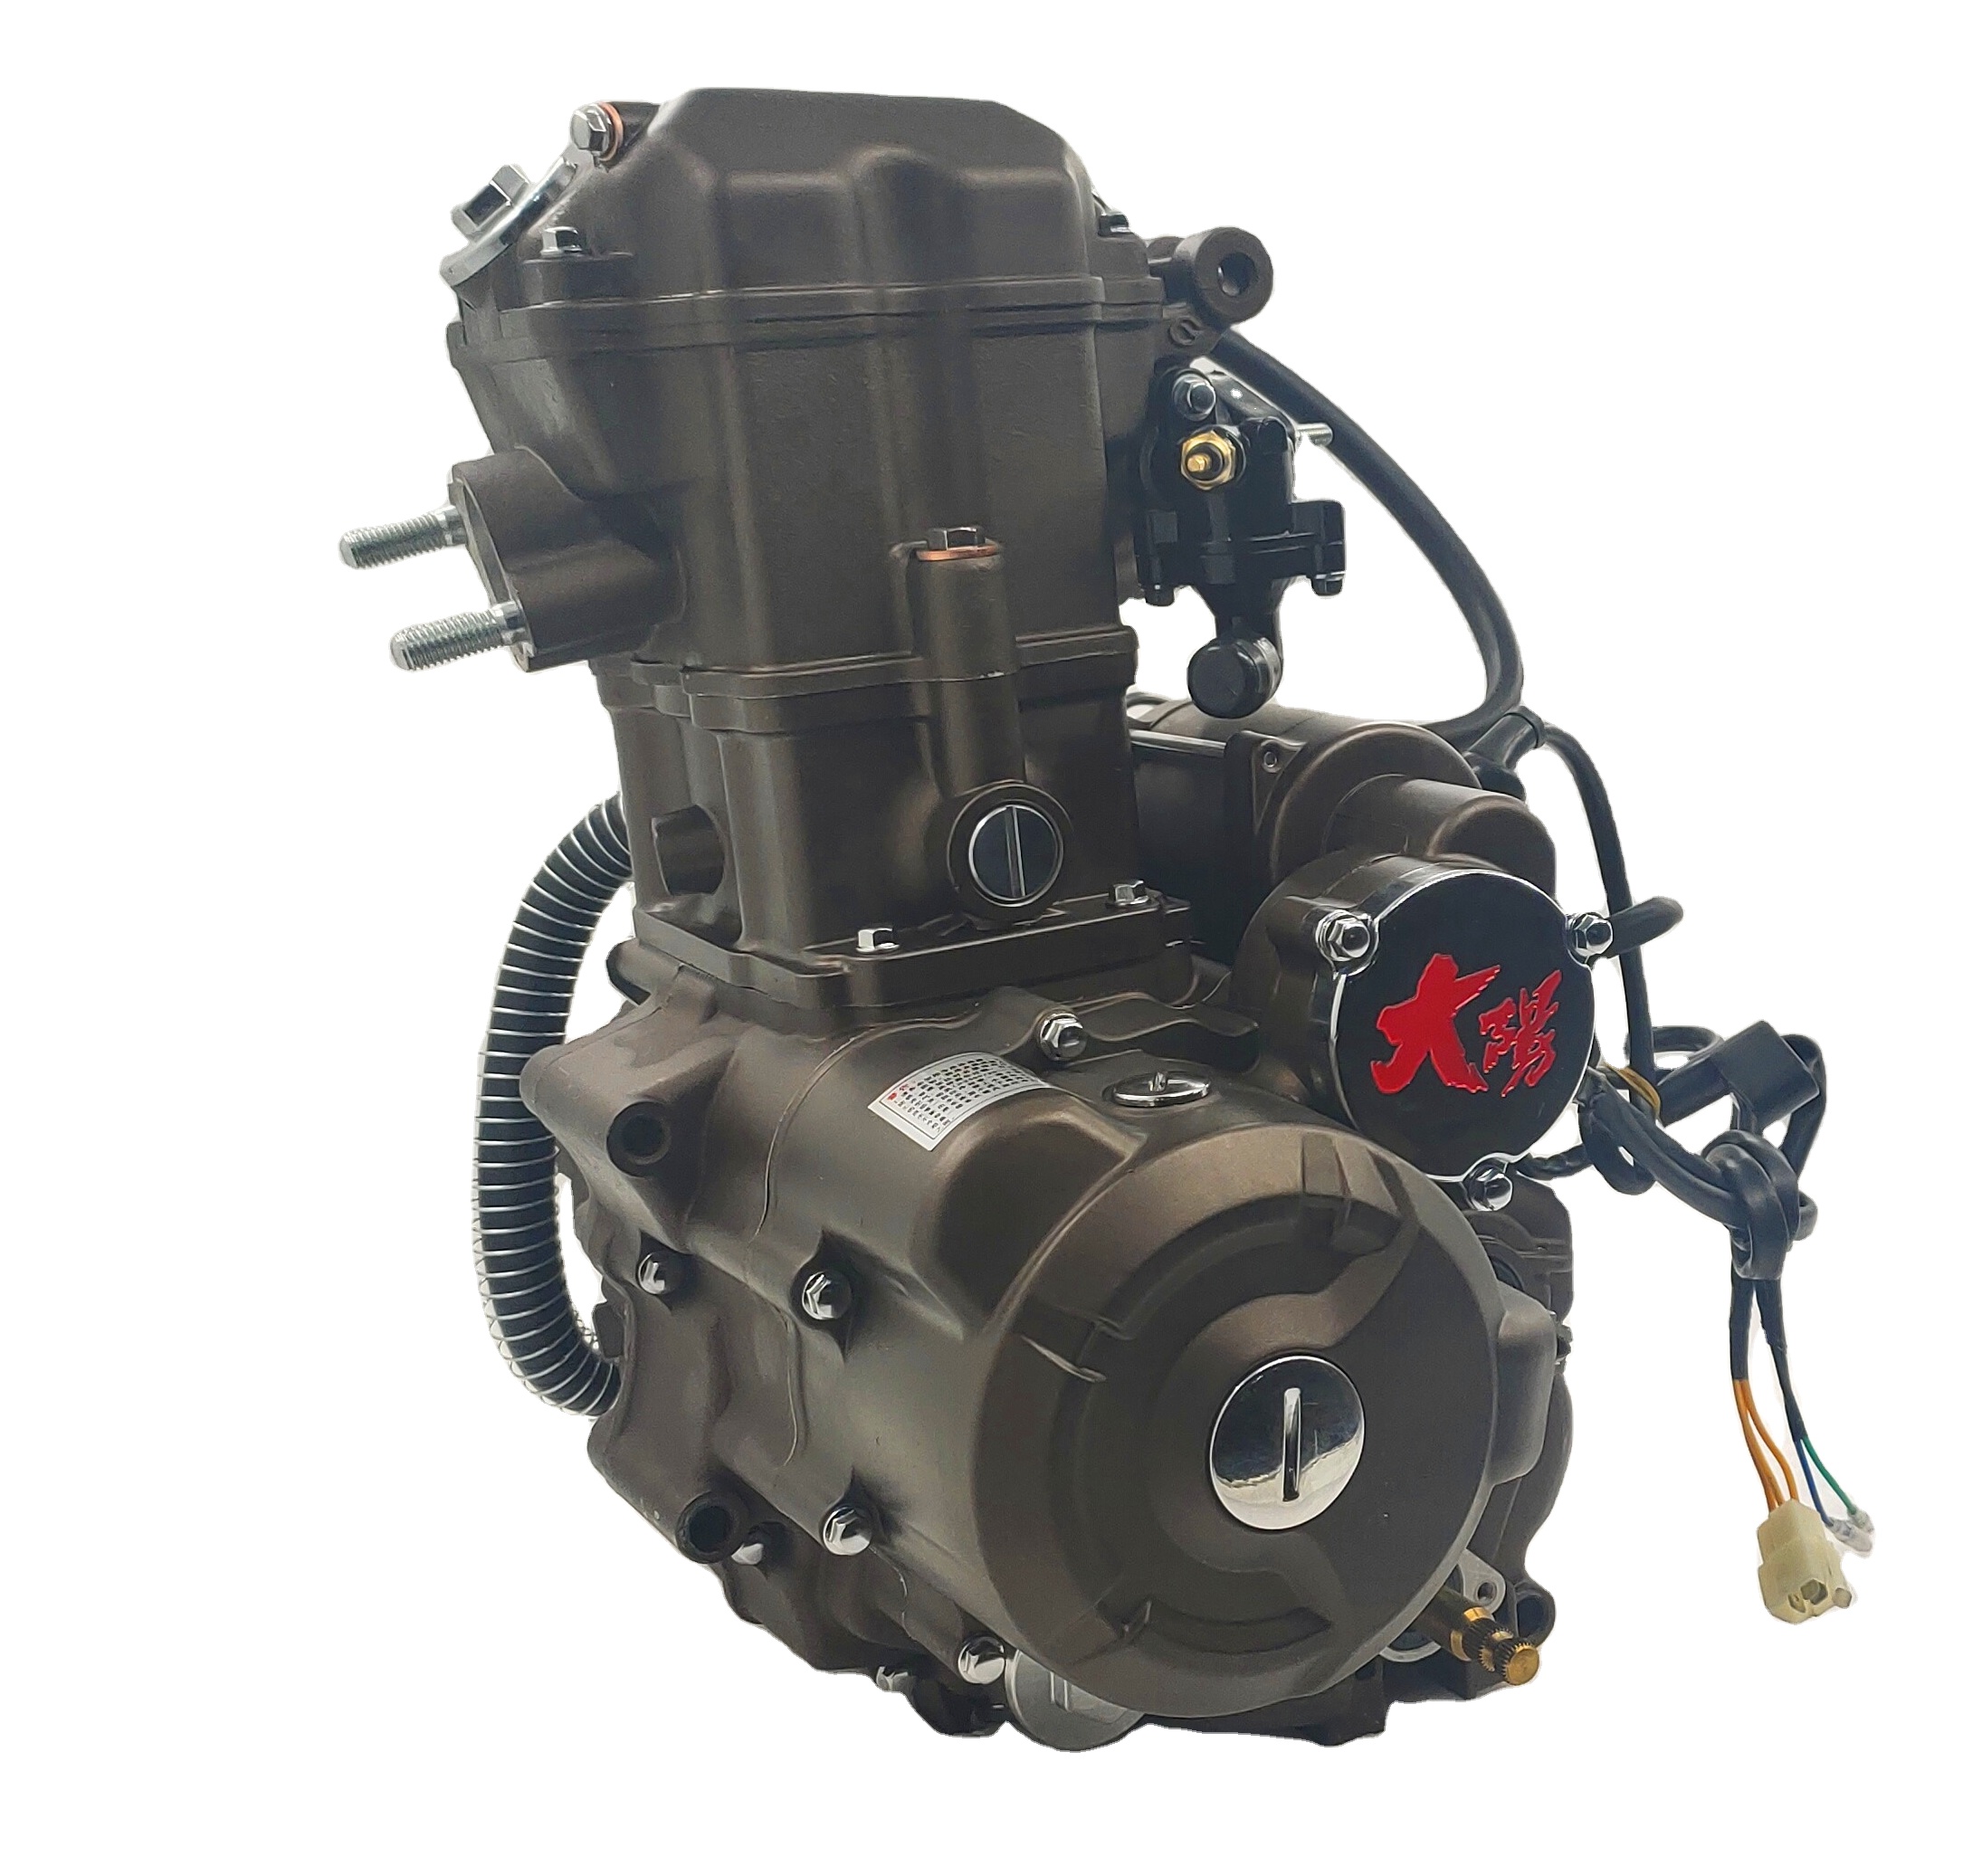 DAYANG LIFAN CG150 New Water-cooled Motorcycle Engine Assembly Single Cylinder Four Stroke Style China 150cc Sea 4 Stroke CDI